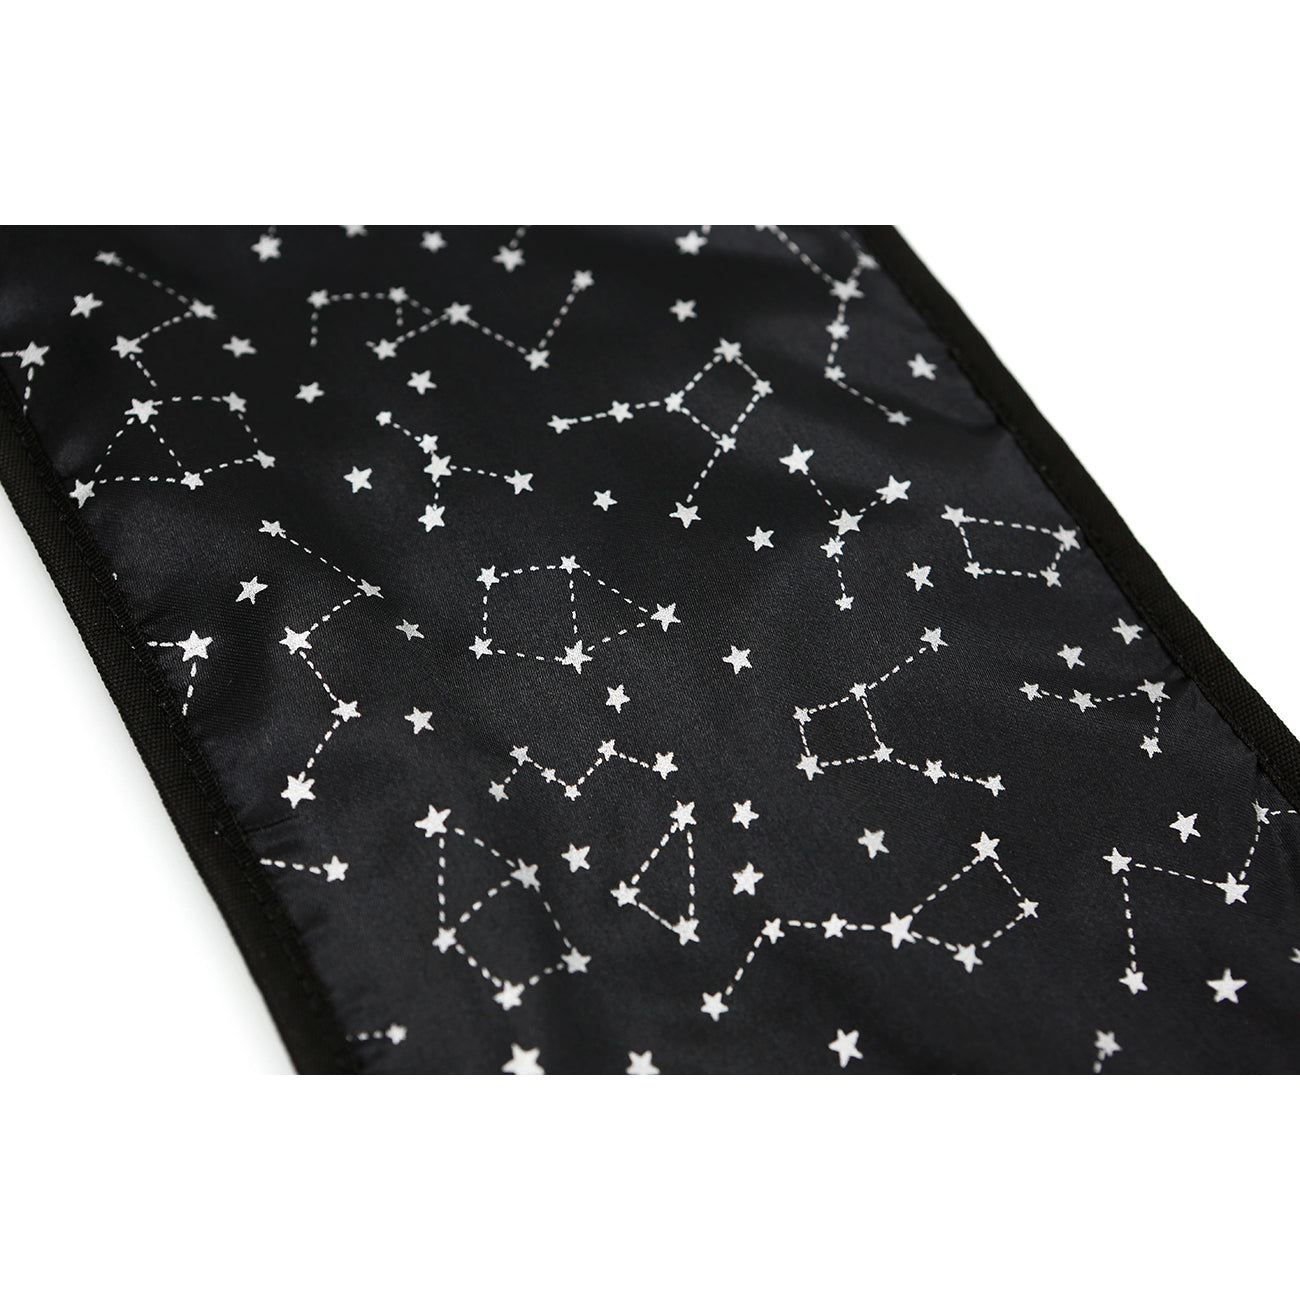 Ita bag constellations insert. The insert background is black with white stars and dotted constellations.